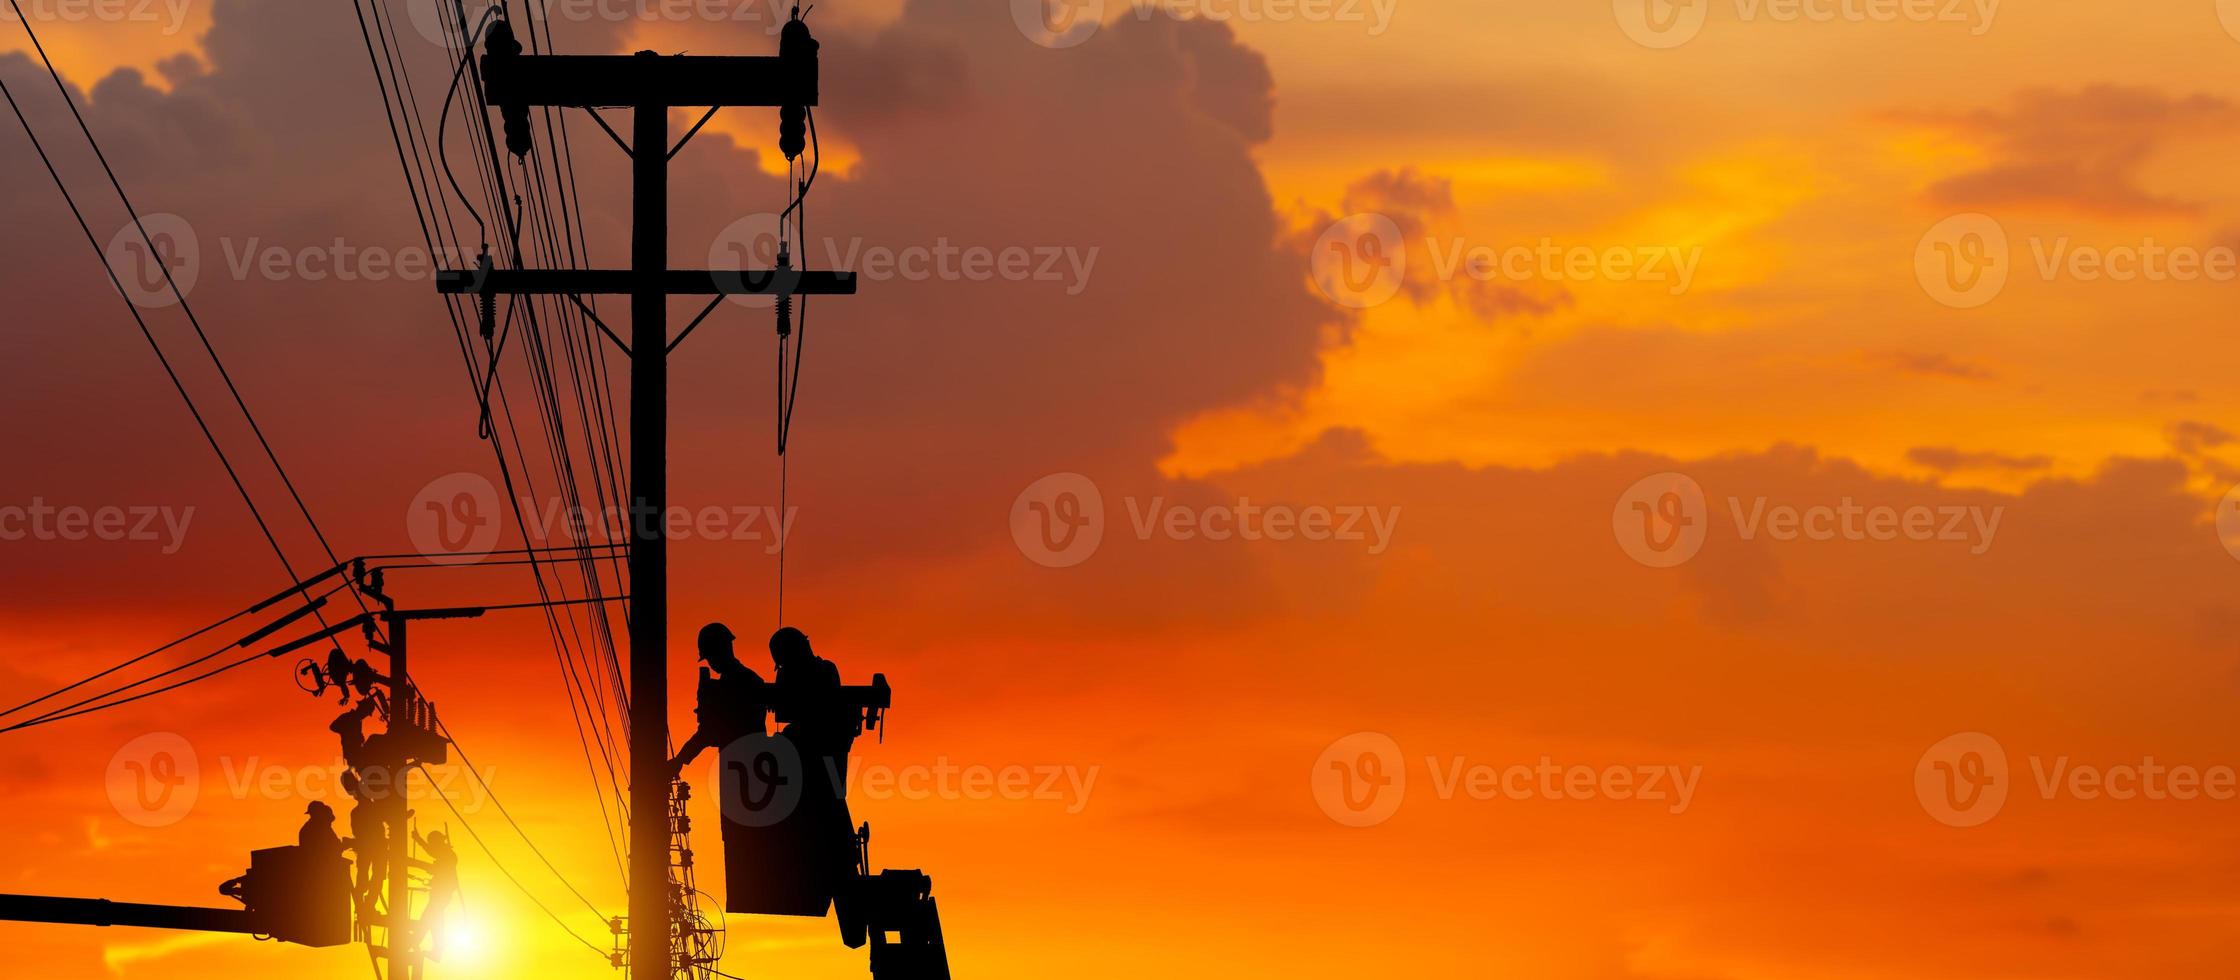 Silhouette of Electrician officer climbs a pole and uses a cable car to maintain a high voltage line system, Shadow of Electrician lineman repairman worker at climbing work on electric post power pole photo